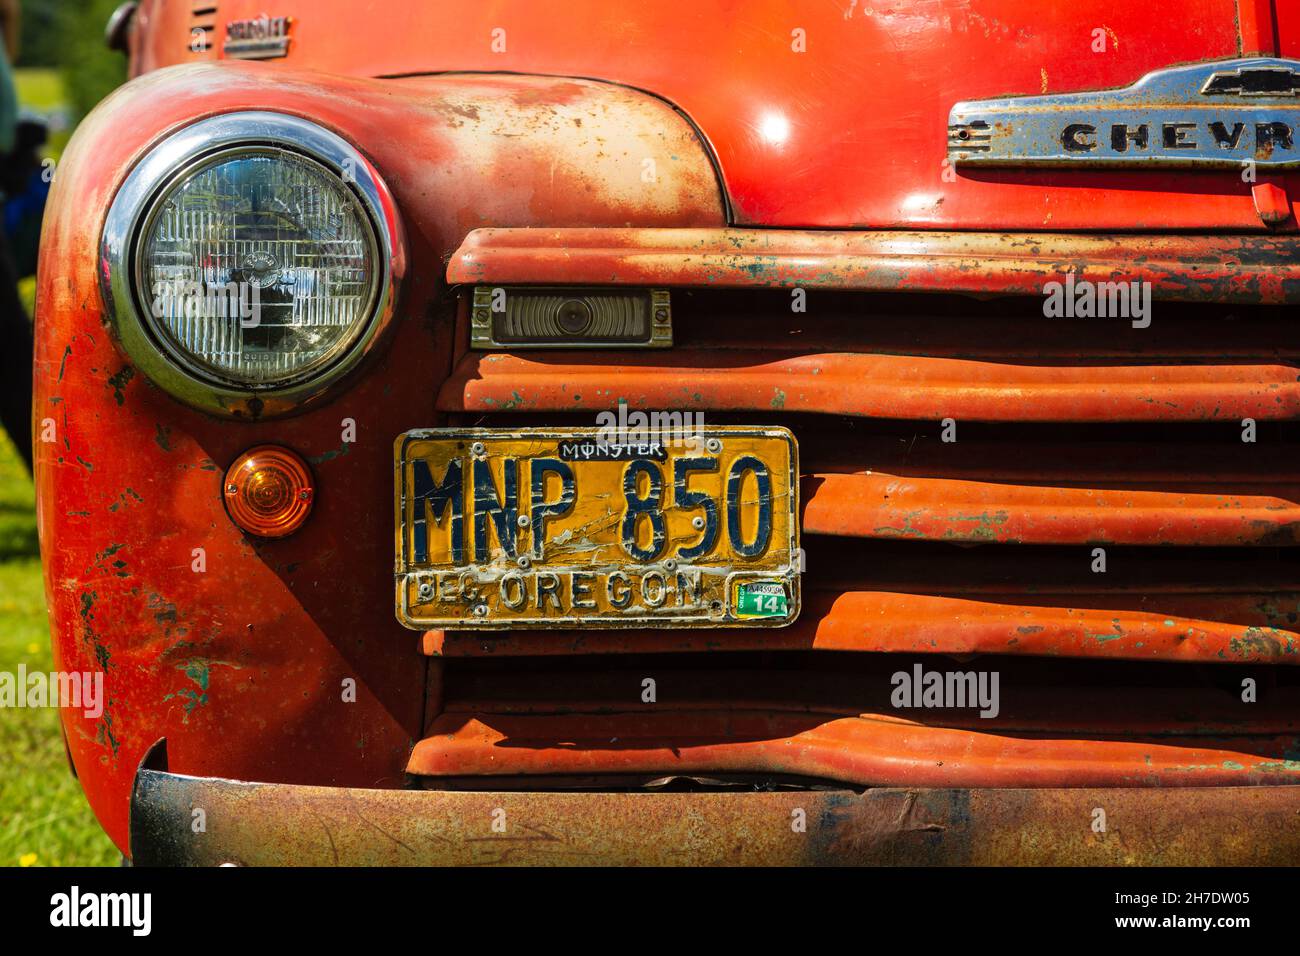 Chevrolet truck with Oregon registration plates. Stock Photo